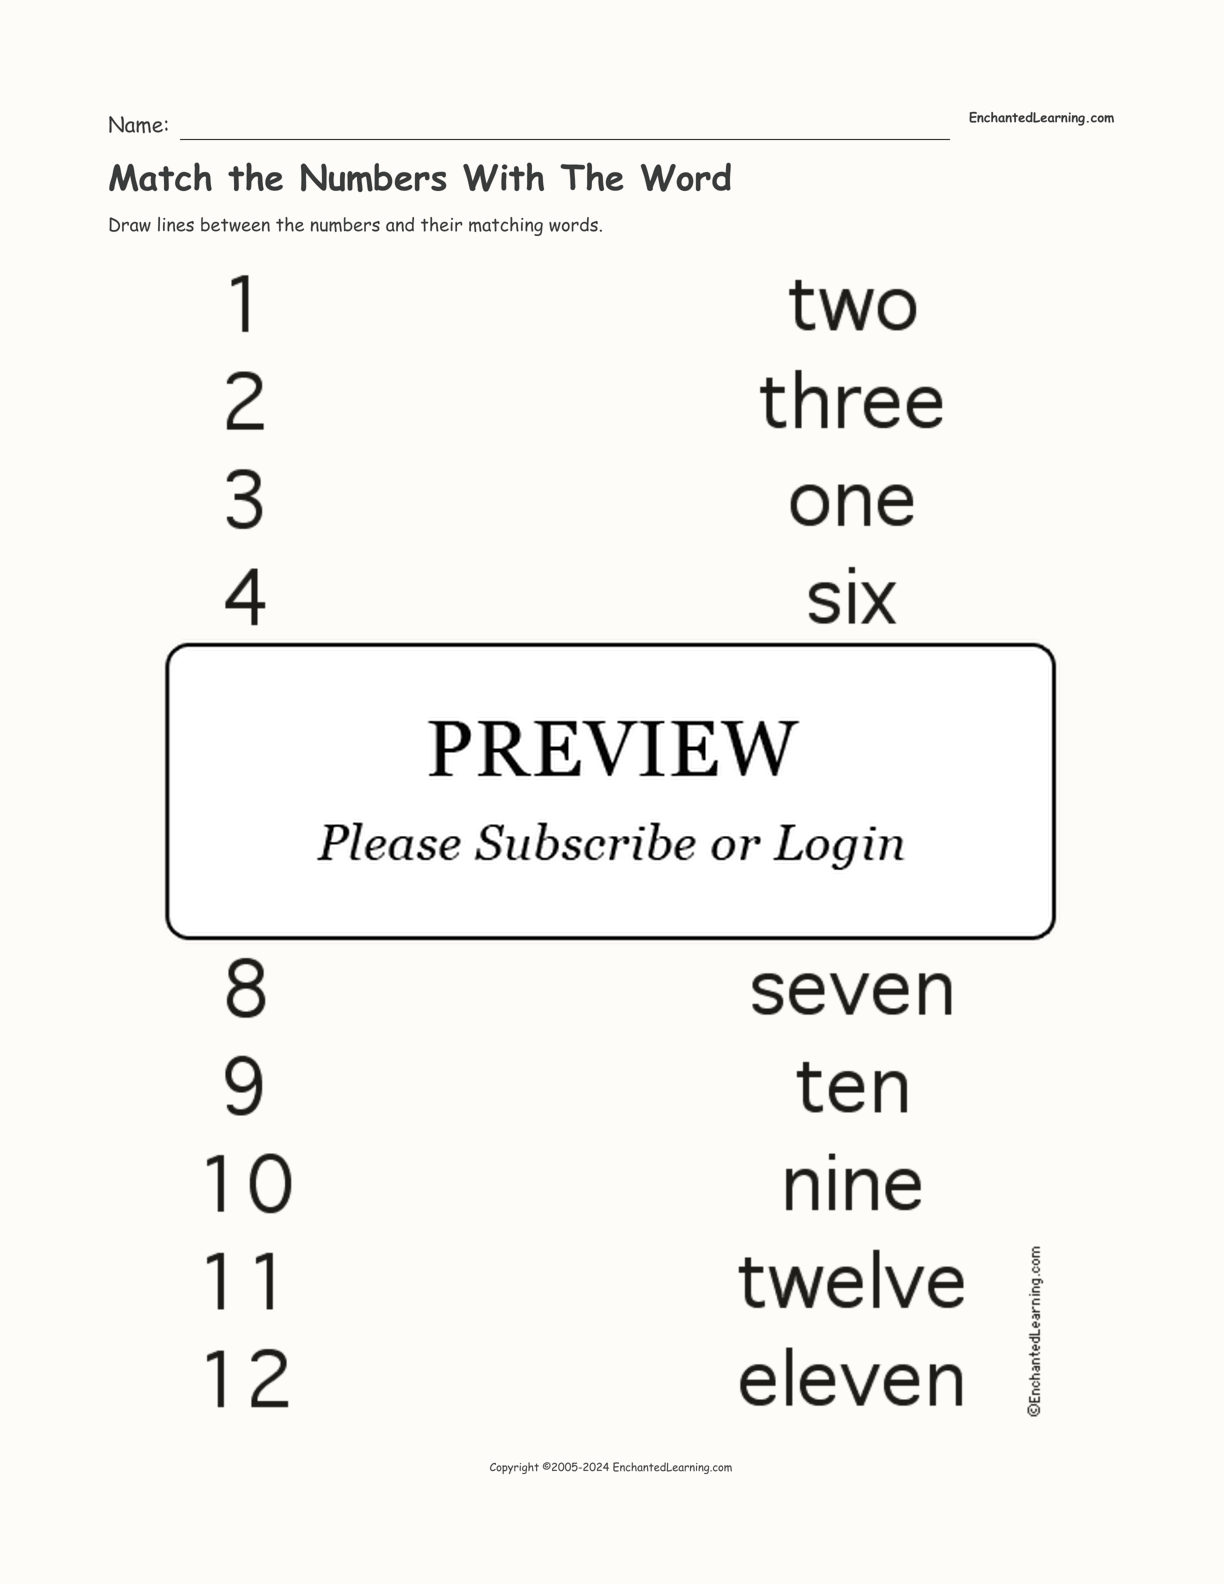 Match the Numbers With The Word interactive worksheet page 1